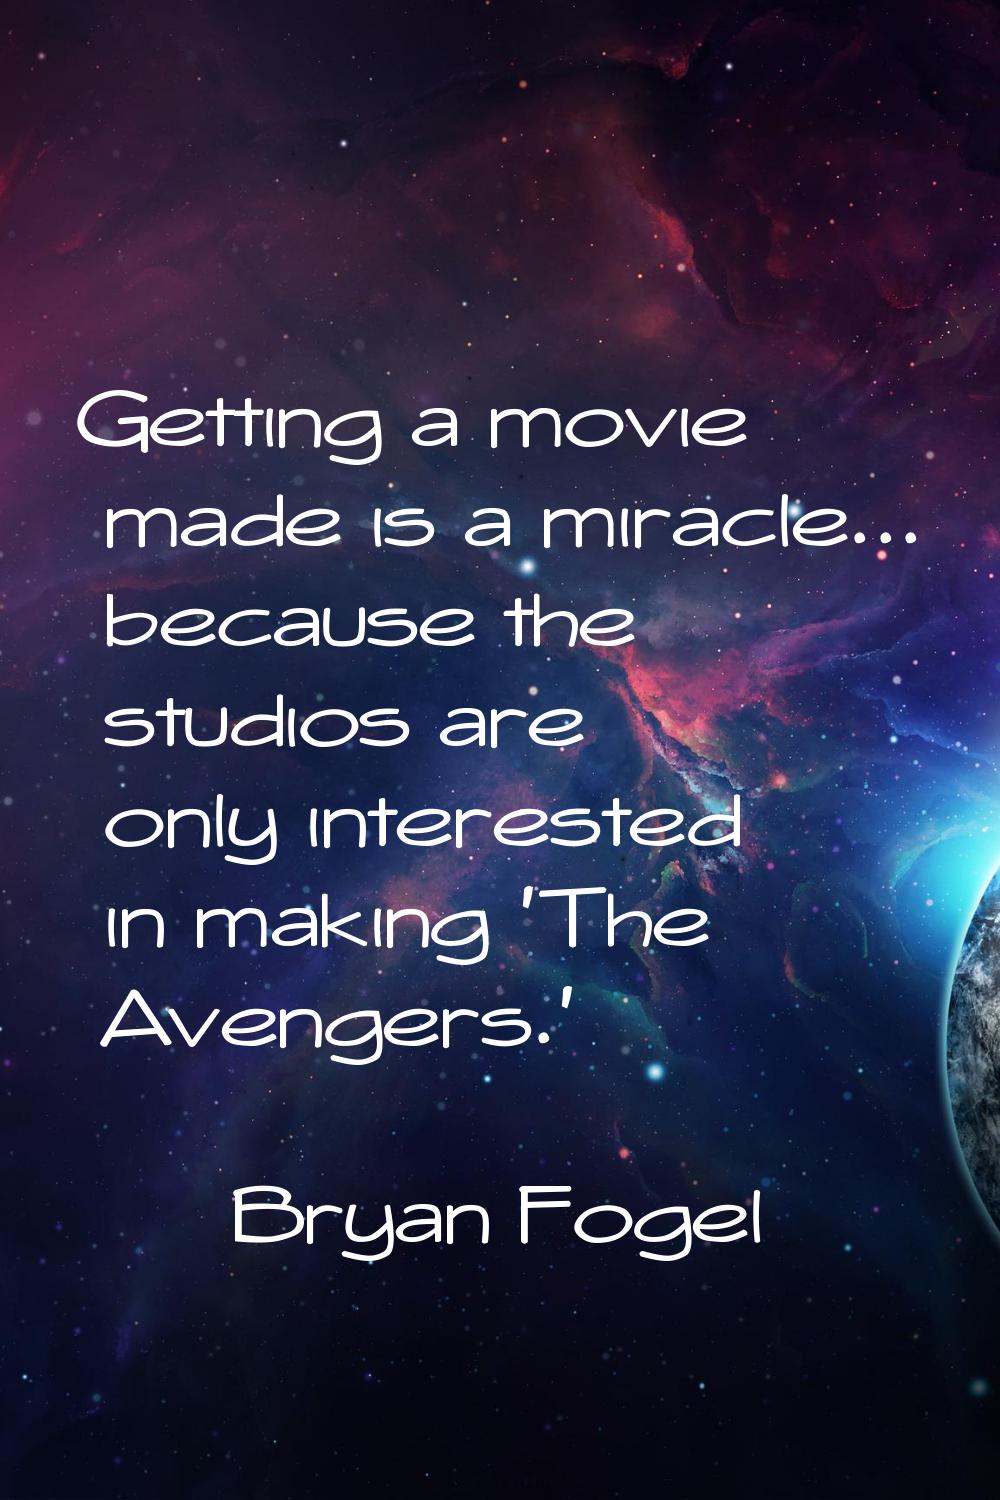 Getting a movie made is a miracle... because the studios are only interested in making 'The Avenger